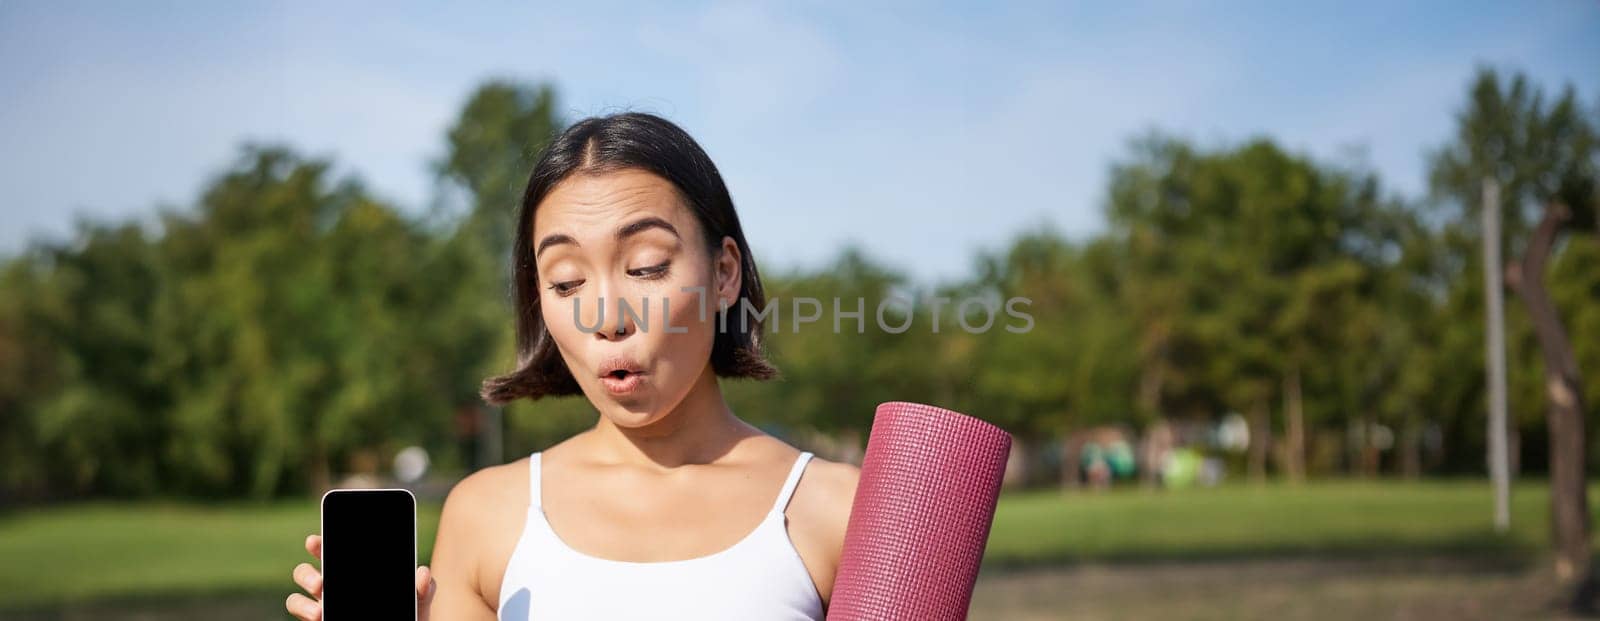 Excited fitness girl recommends application for sport and workout, shows phone screen, standing with rubber yoga mat in park after training session.